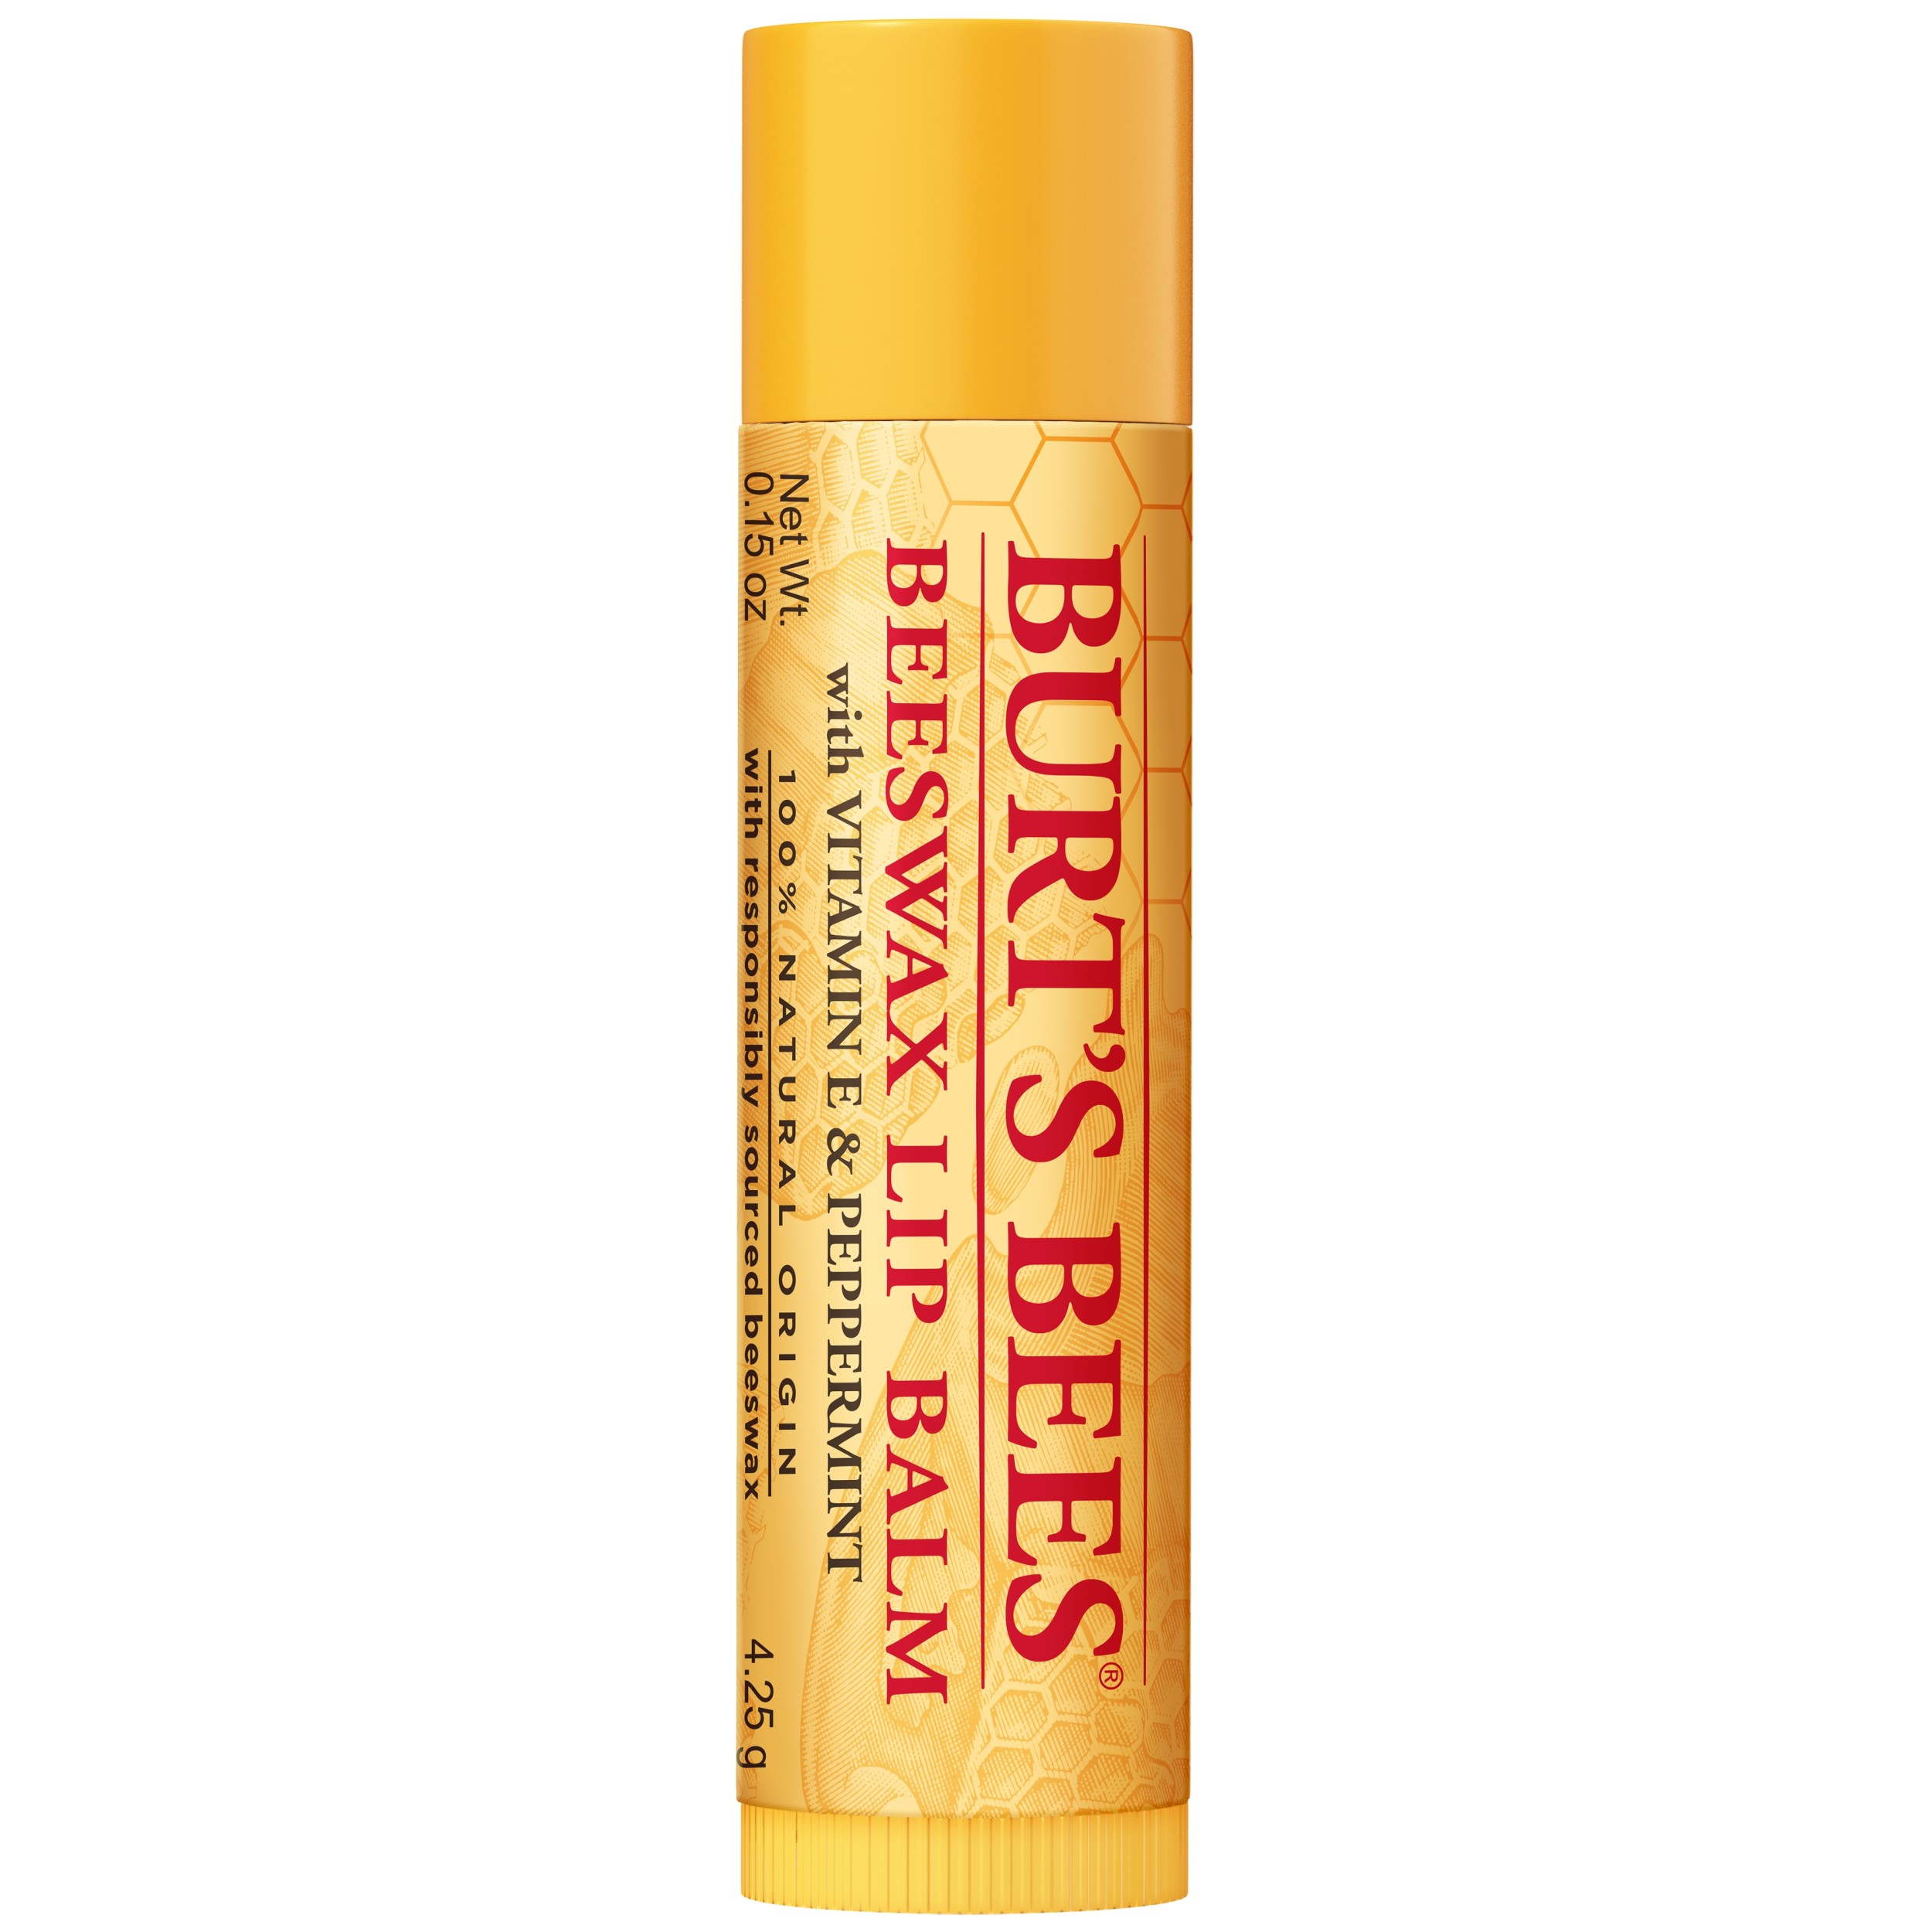 Burt's Bees 100% Natural  Moisturizing Lip Balm, with Beeswax, Vitamin E & Peppermint Oil, 1 Tube - image 3 of 12